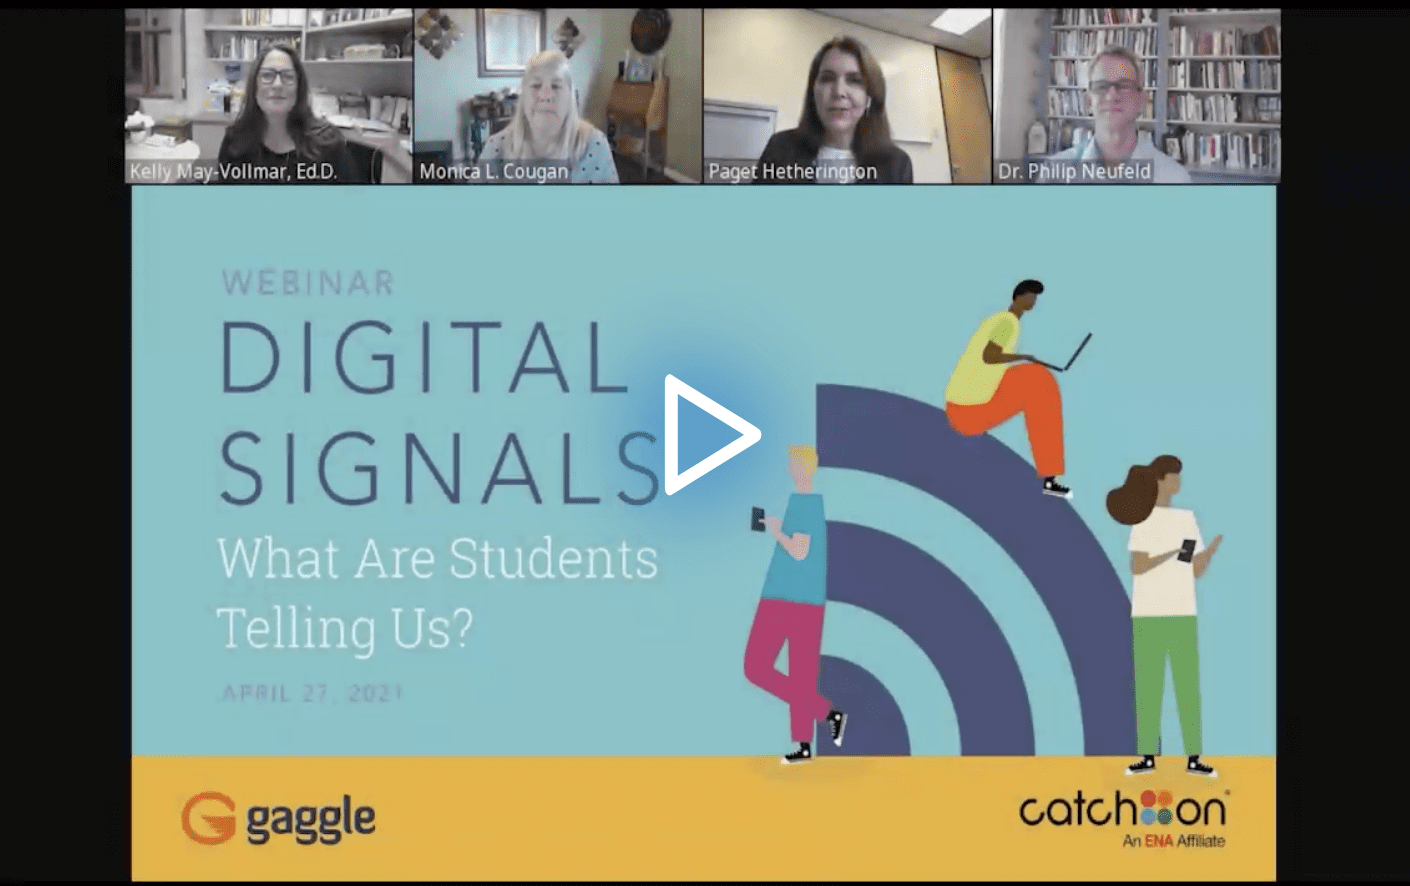 Digital Signals: What Are Students Telling Us? edLeader Panel recording link